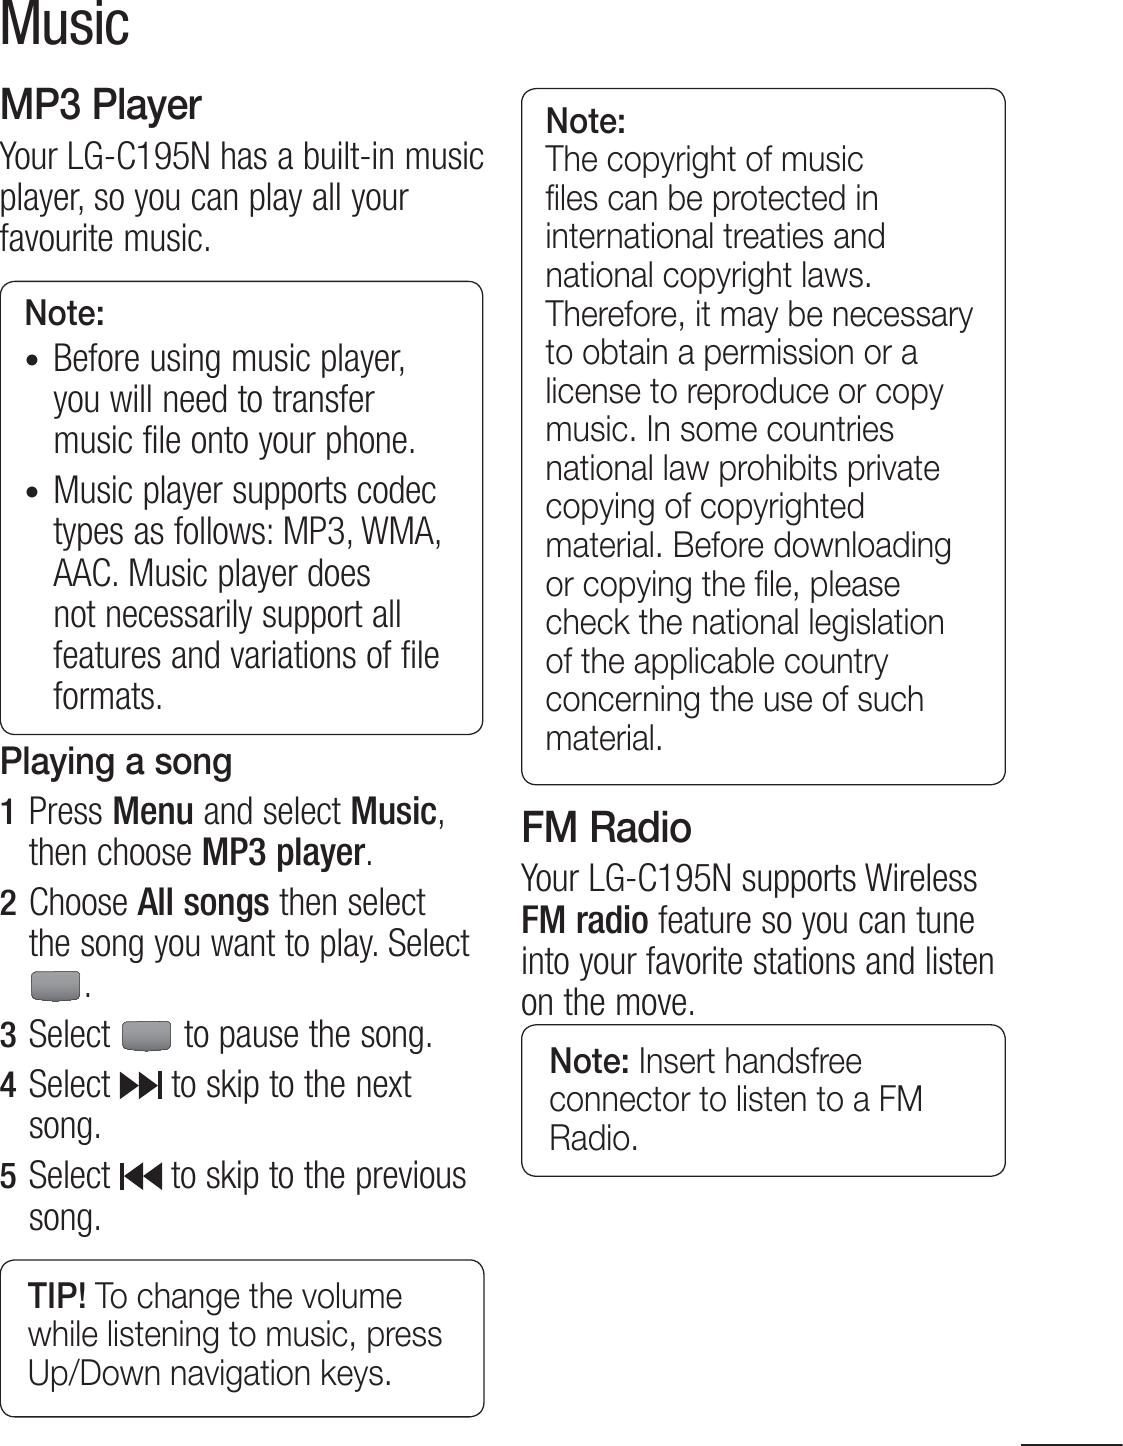 33MusicMP3 PlayerYour LG-C195N has a built-in music player, so you can play all your favourite music.Note: t Before using music player, you will need to transfer music file onto your phone.t Music player supports codec types as follows: MP3, WMA, AAC. Music player does not necessarily support all features and variations of file formats.Playing a song1  Press Menu and select Music, then choose MP3 player.2  Choose All songs then select the song you want to play. Select .3  Select   to pause the song.4  Select   to skip to the next song.5  Select  to skip to the previous song.TIP! To change the volume while listening to music, press Up/Down navigation keys.Note: The copyright of music ﬁles can be protected in international treaties and national copyright laws. Therefore, it may be necessary to obtain a permission or a license to reproduce or copy music. In some countries national law prohibits private copying of copyrighted material. Before downloading or copying the ﬁle, please check the national legislation of the applicable country concerning the use of such material.FM RadioYour LG-C195N supports Wireless FM radio feature so you can tune into your favorite stations and listen on the move.Note: Insert handsfree connector to listen to a FM Radio.